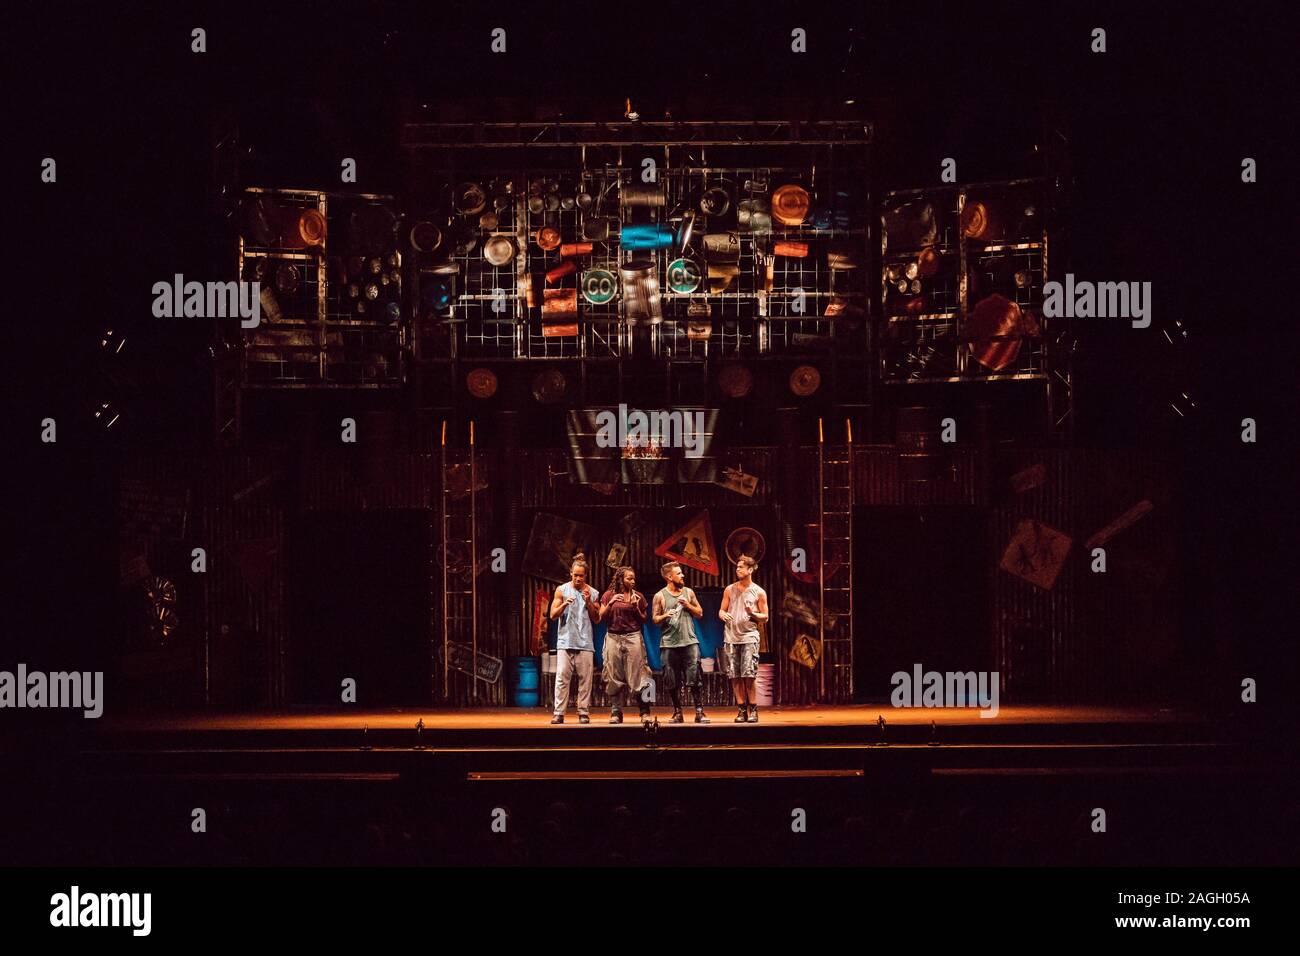 Padova, Italy. 12th Nov, 2019. Stomp during Stomp at the Gran Teatro Geox  in Padova, Italy, November 12 2019 Credit: Independent Photo Agency/Alamy  Live News Stock Photo - Alamy